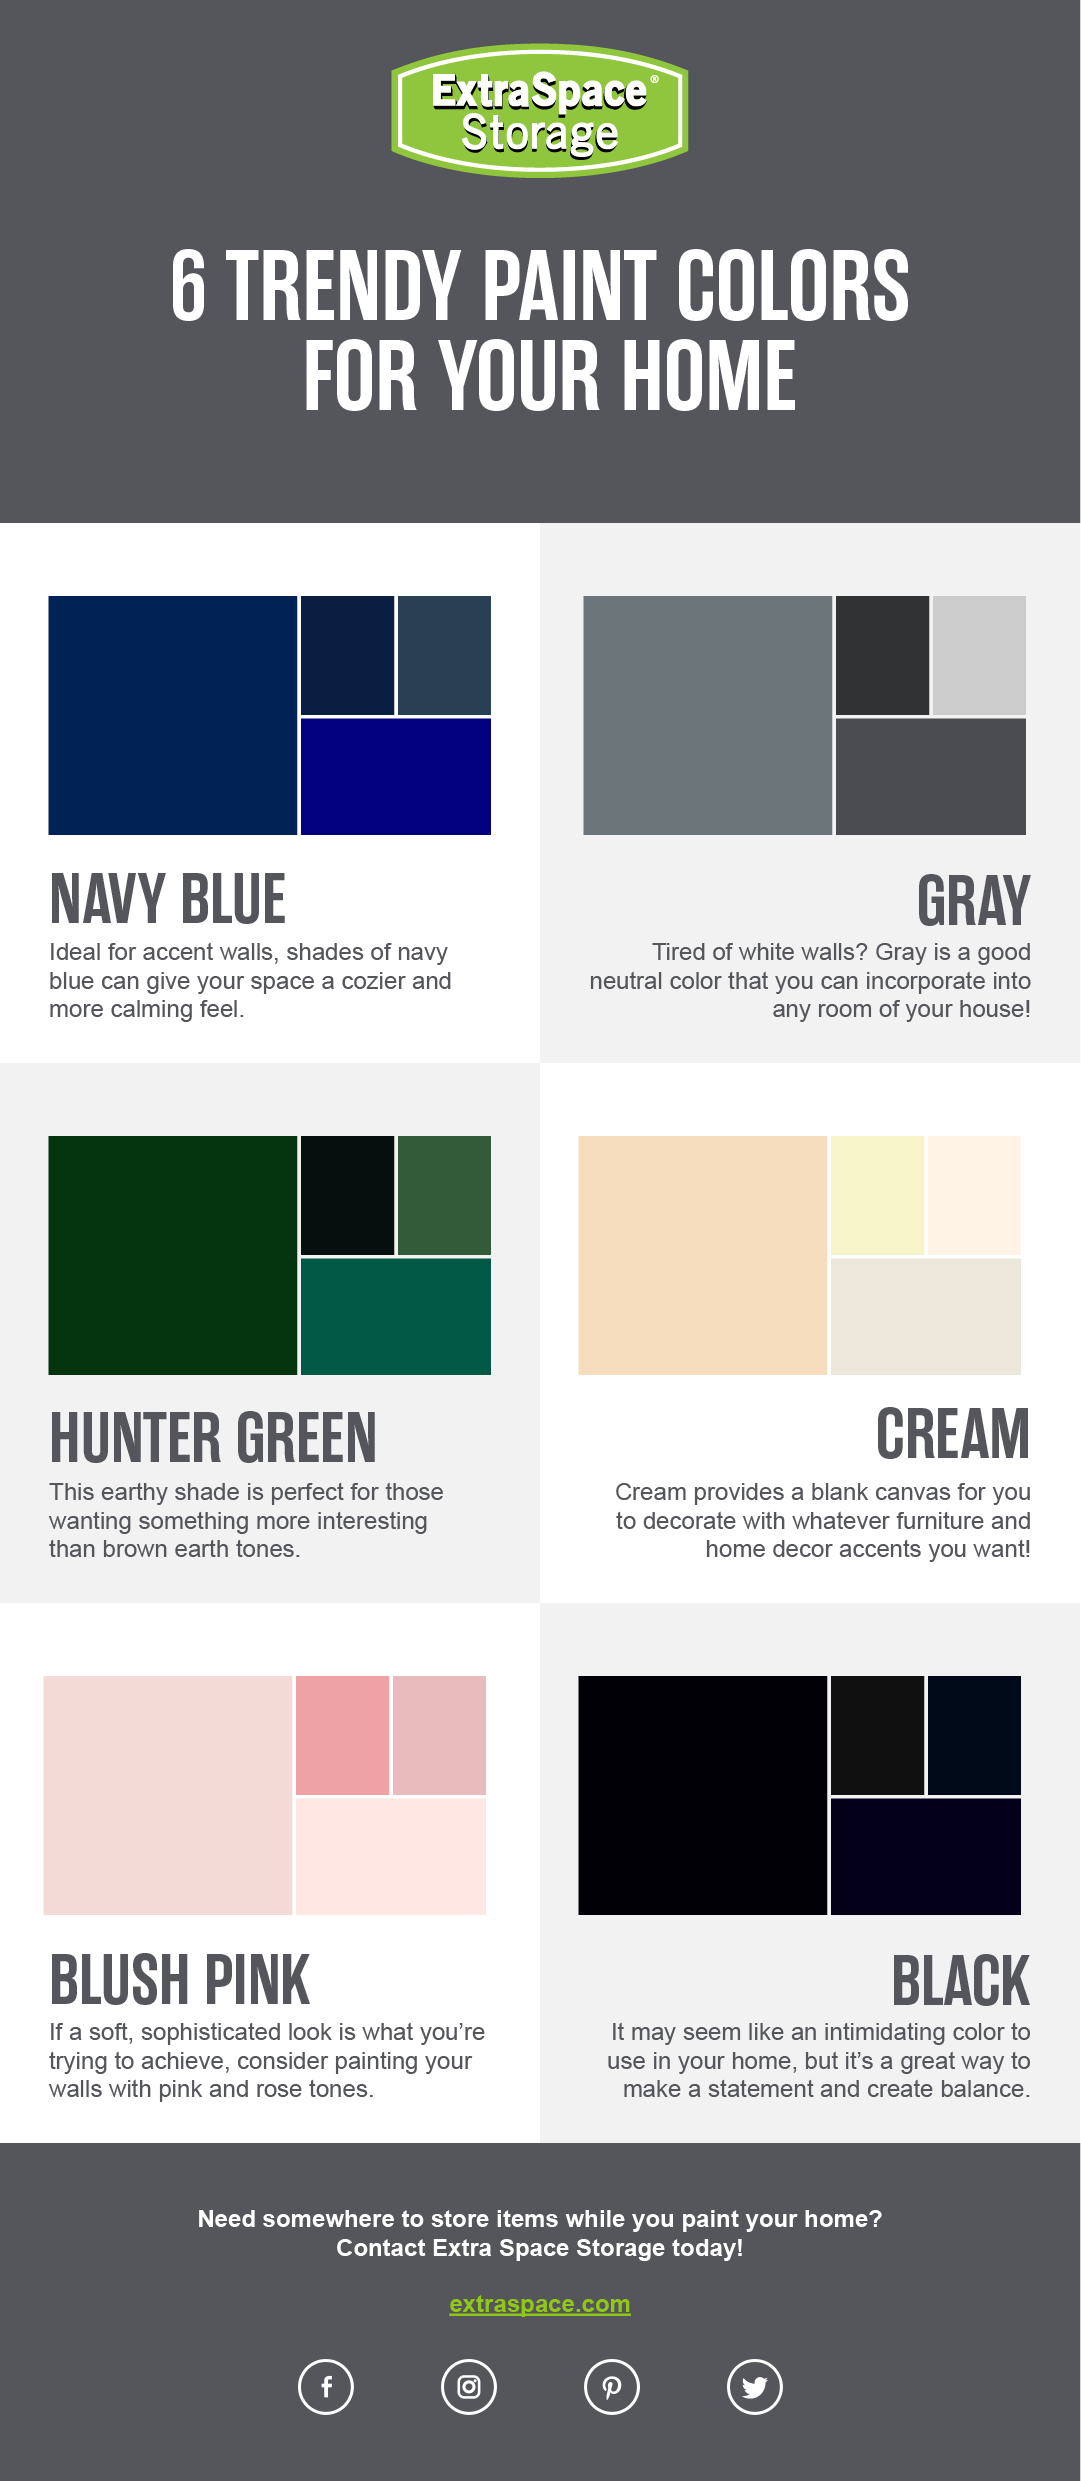 Infographic: 6 Trendy Paint Colors for Your Home